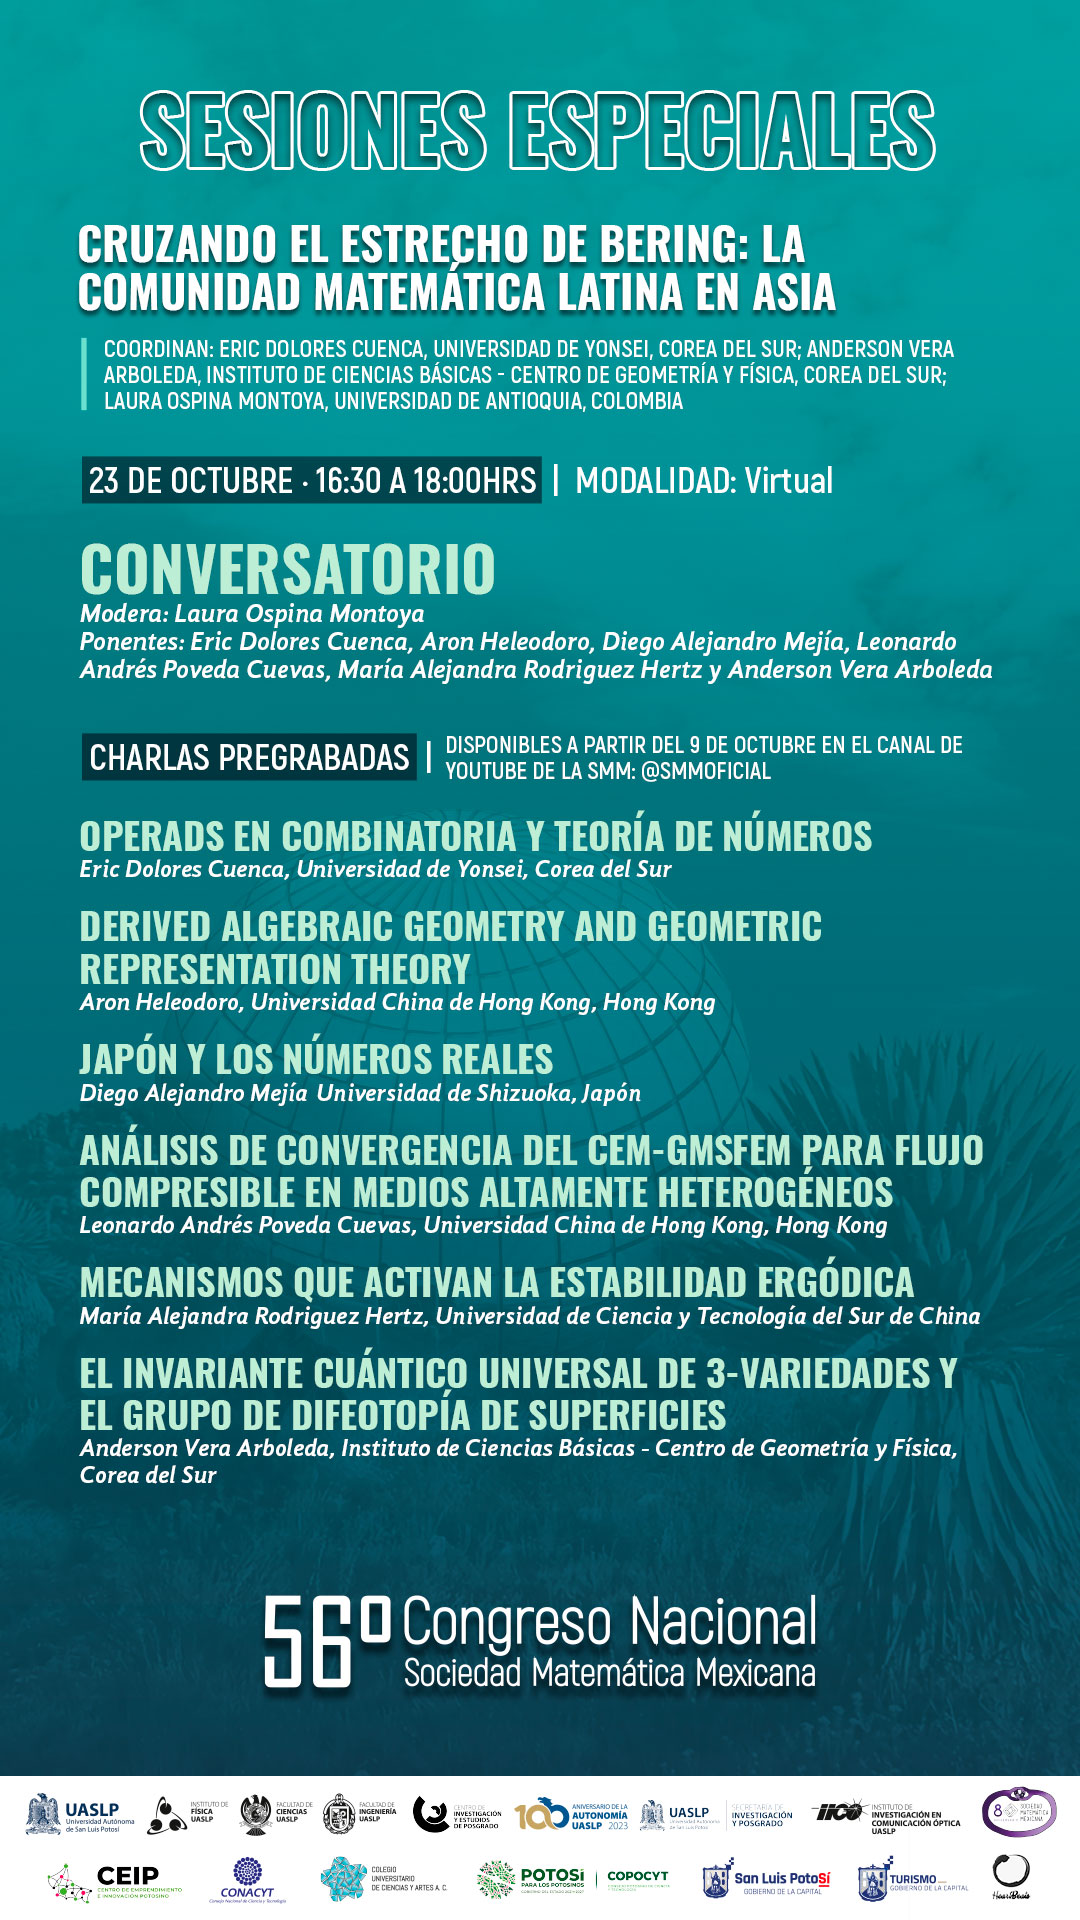 Meeting of the Mexican mathematical society